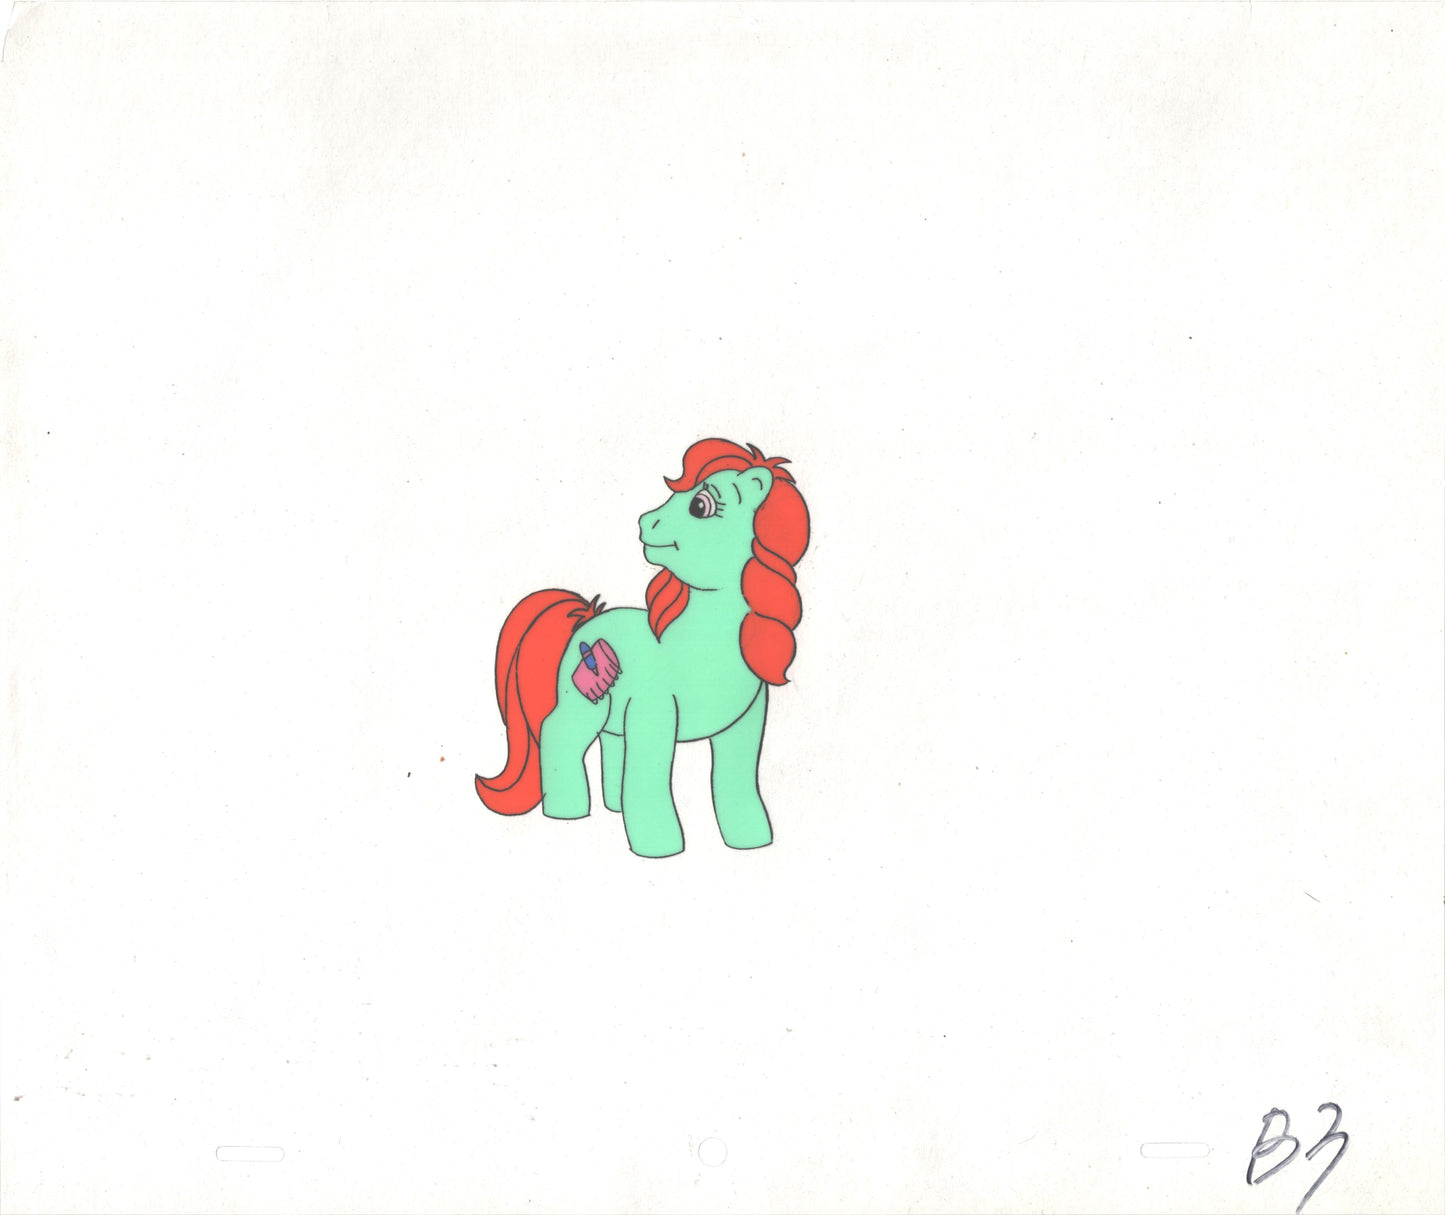 My Little Pony Original Production Animation Cel Hasbro Sunbow 1980s or 90s Used to Make the Cartoon H-B3